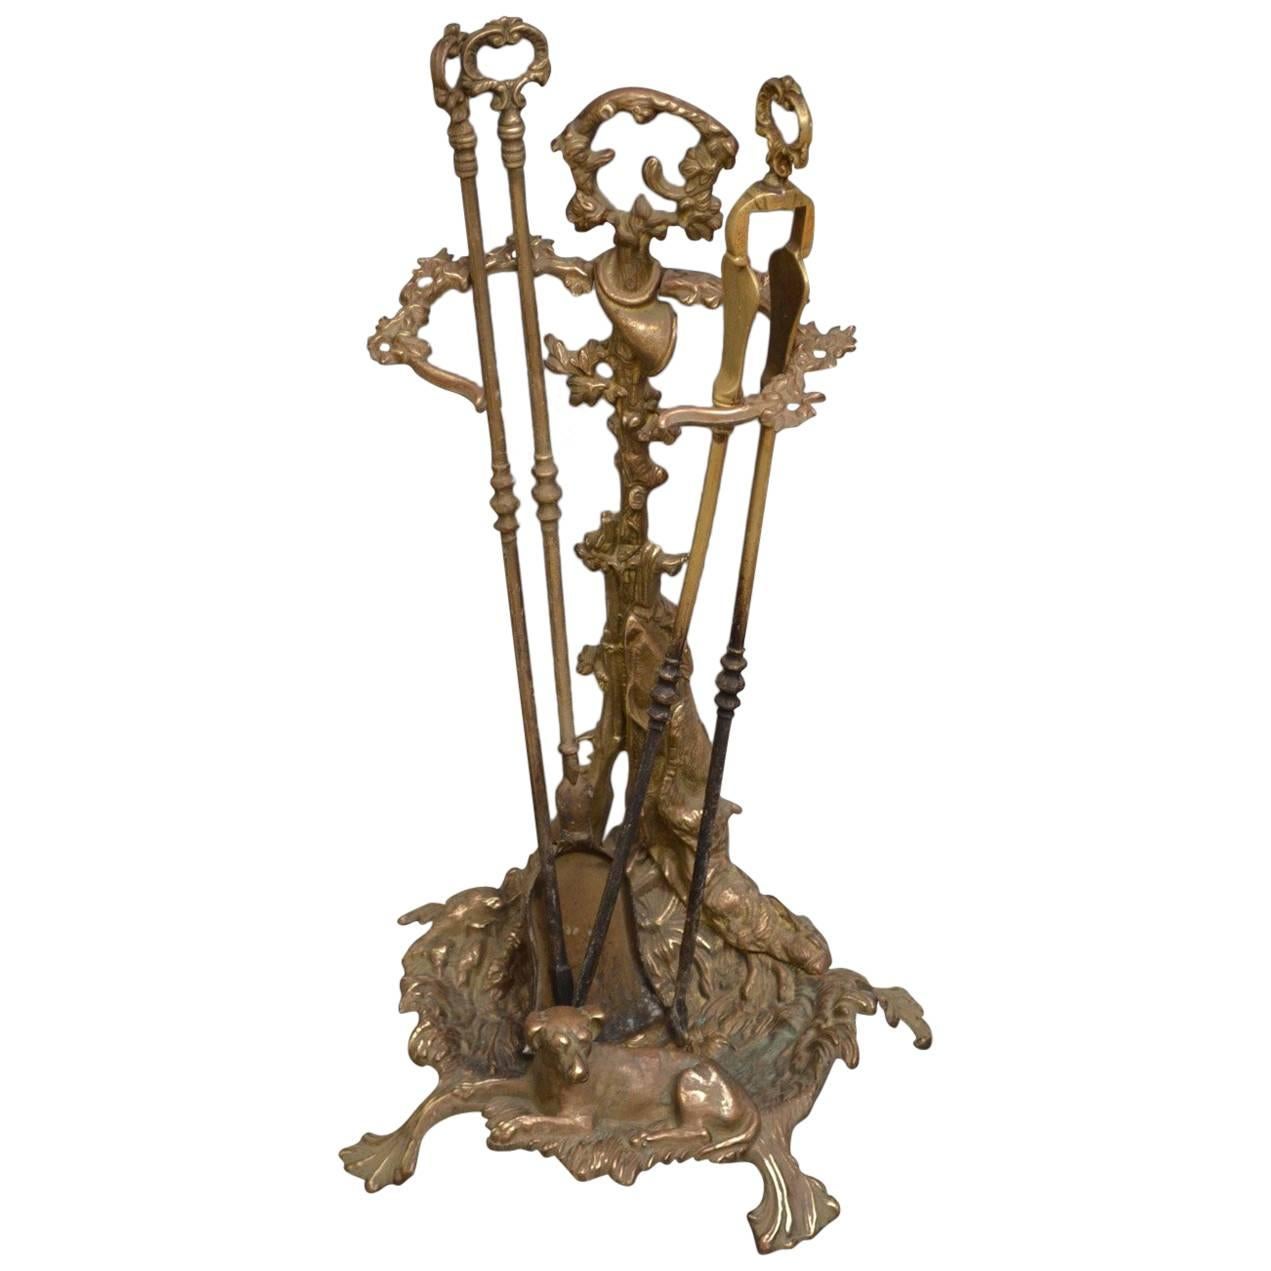 Brass Fire Companion Stand with Fire Irons or Umbrella Stand